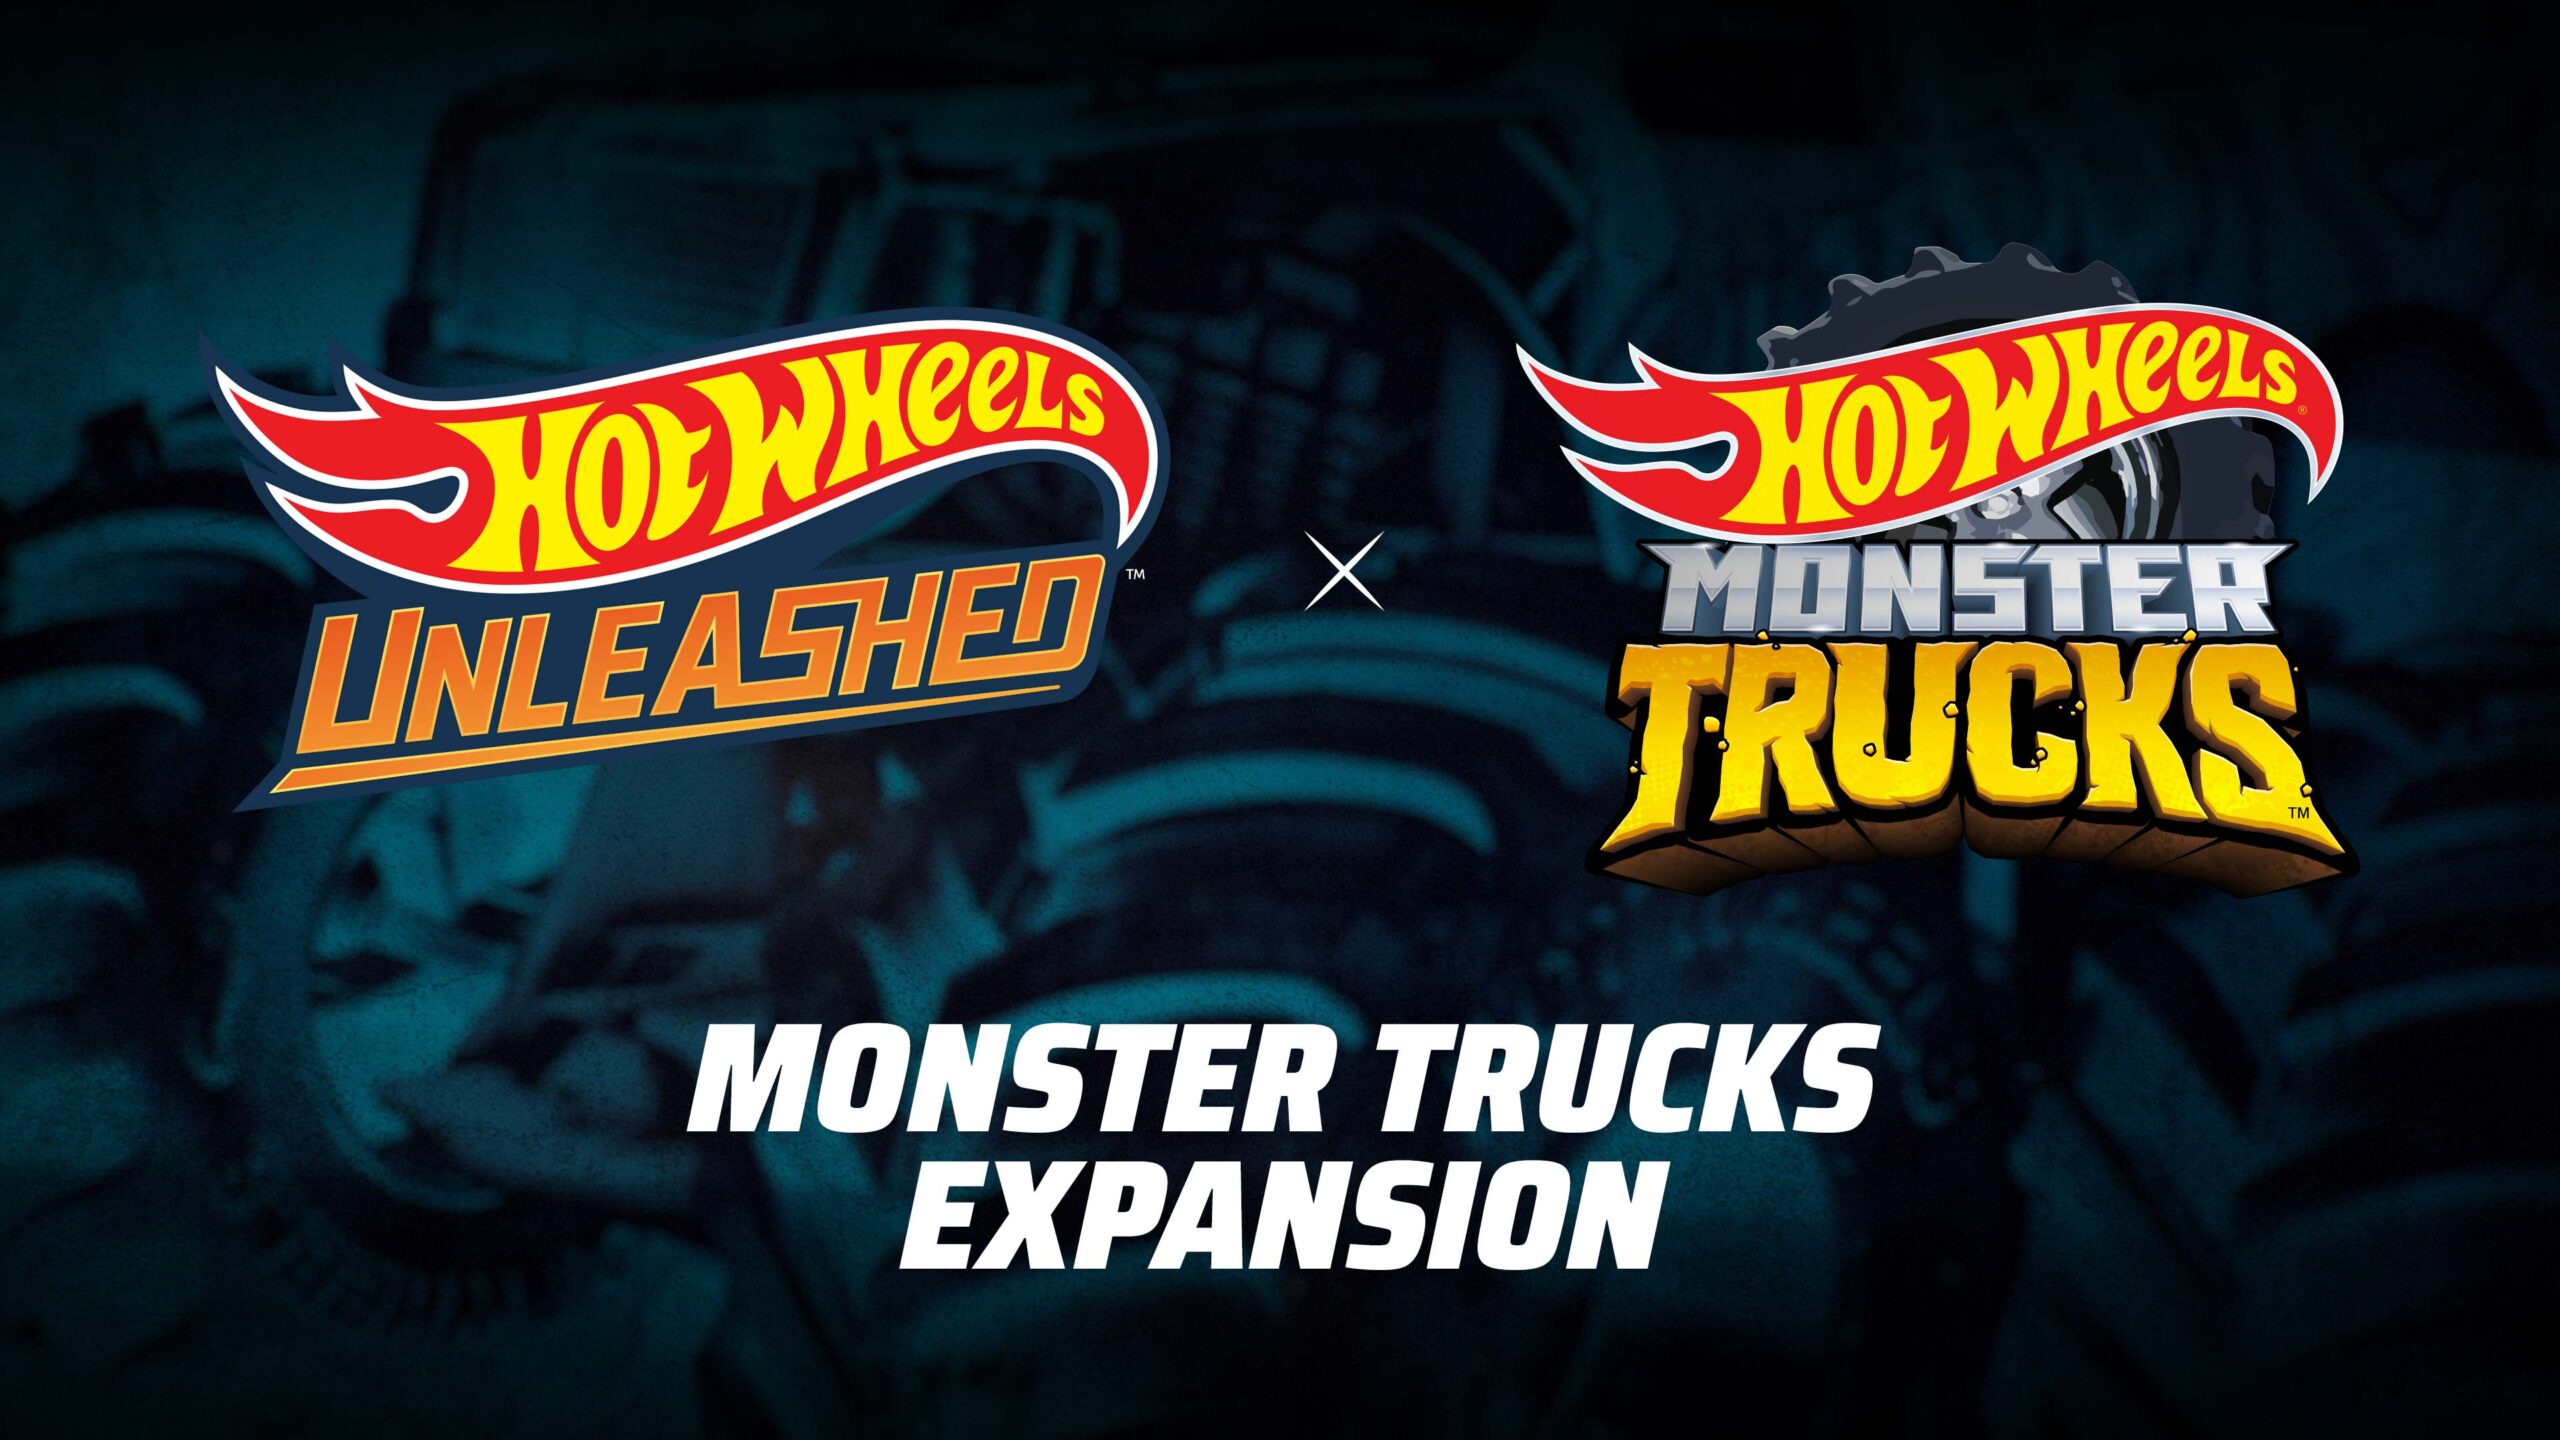 Monster Trucks DLC coming to Hot Wheels Unleashed in April, April, April!